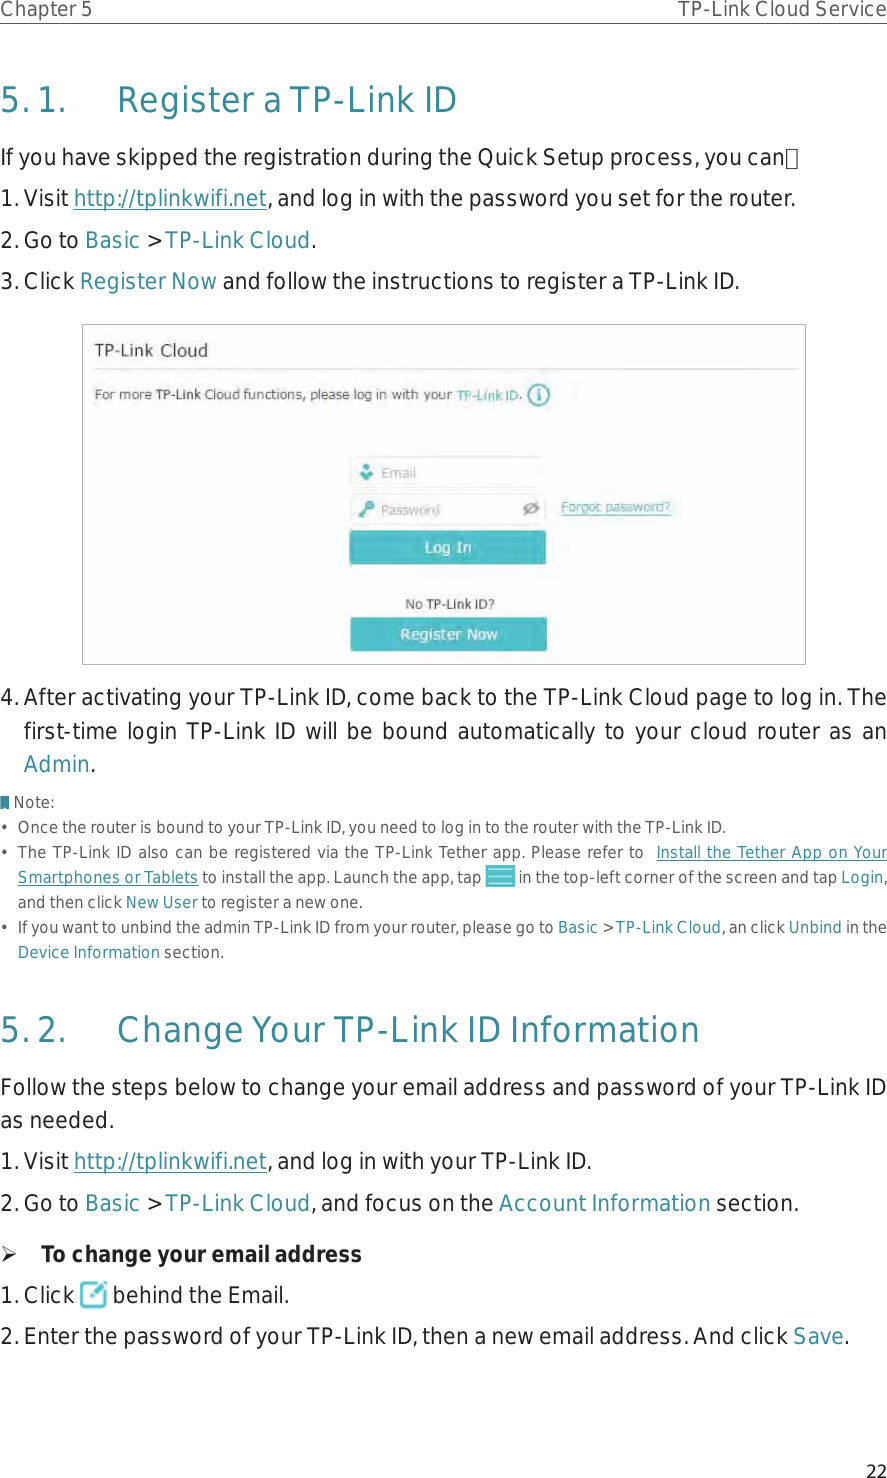 22Chapter 5 TP-Link Cloud Service5. 1.  Register a TP-Link IDIf you have skipped the registration during the Quick Setup process, you can：1. Visit http://tplinkwifi.net, and log in with the password you set for the router.2. Go to Basic &gt; TP-Link Cloud.3. Click Register Now and follow the instructions to register a TP-Link ID.4. After activating your TP-Link ID, come back to the TP-Link Cloud page to log in. The first-time login TP-Link ID will be bound automatically to your cloud router as an Admin.Note:•  Once the router is bound to your TP-Link ID, you need to log in to the router with the TP-Link ID. •  The TP-Link ID also can be registered via the TP-Link Tether app. Please refer to  Install the Tether App on Your Smartphones or Tablets to install the app. Launch the app, tap   in the top-left corner of the screen and tap Login, and then click New User to register a new one.•  If you want to unbind the admin TP-Link ID from your router, please go to Basic &gt; TP-Link Cloud, an click Unbind in the Device Information section.5. 2.  Change Your TP-Link ID InformationFollow the steps below to change your email address and password of your TP-Link ID as needed.1. Visit http://tplinkwifi.net, and log in with your TP-Link ID.2. Go to Basic &gt; TP-Link Cloud, and focus on the Account Information section. ¾To change your email address1. Click   behind the Email.2. Enter the password of your TP-Link ID, then a new email address. And click Save.